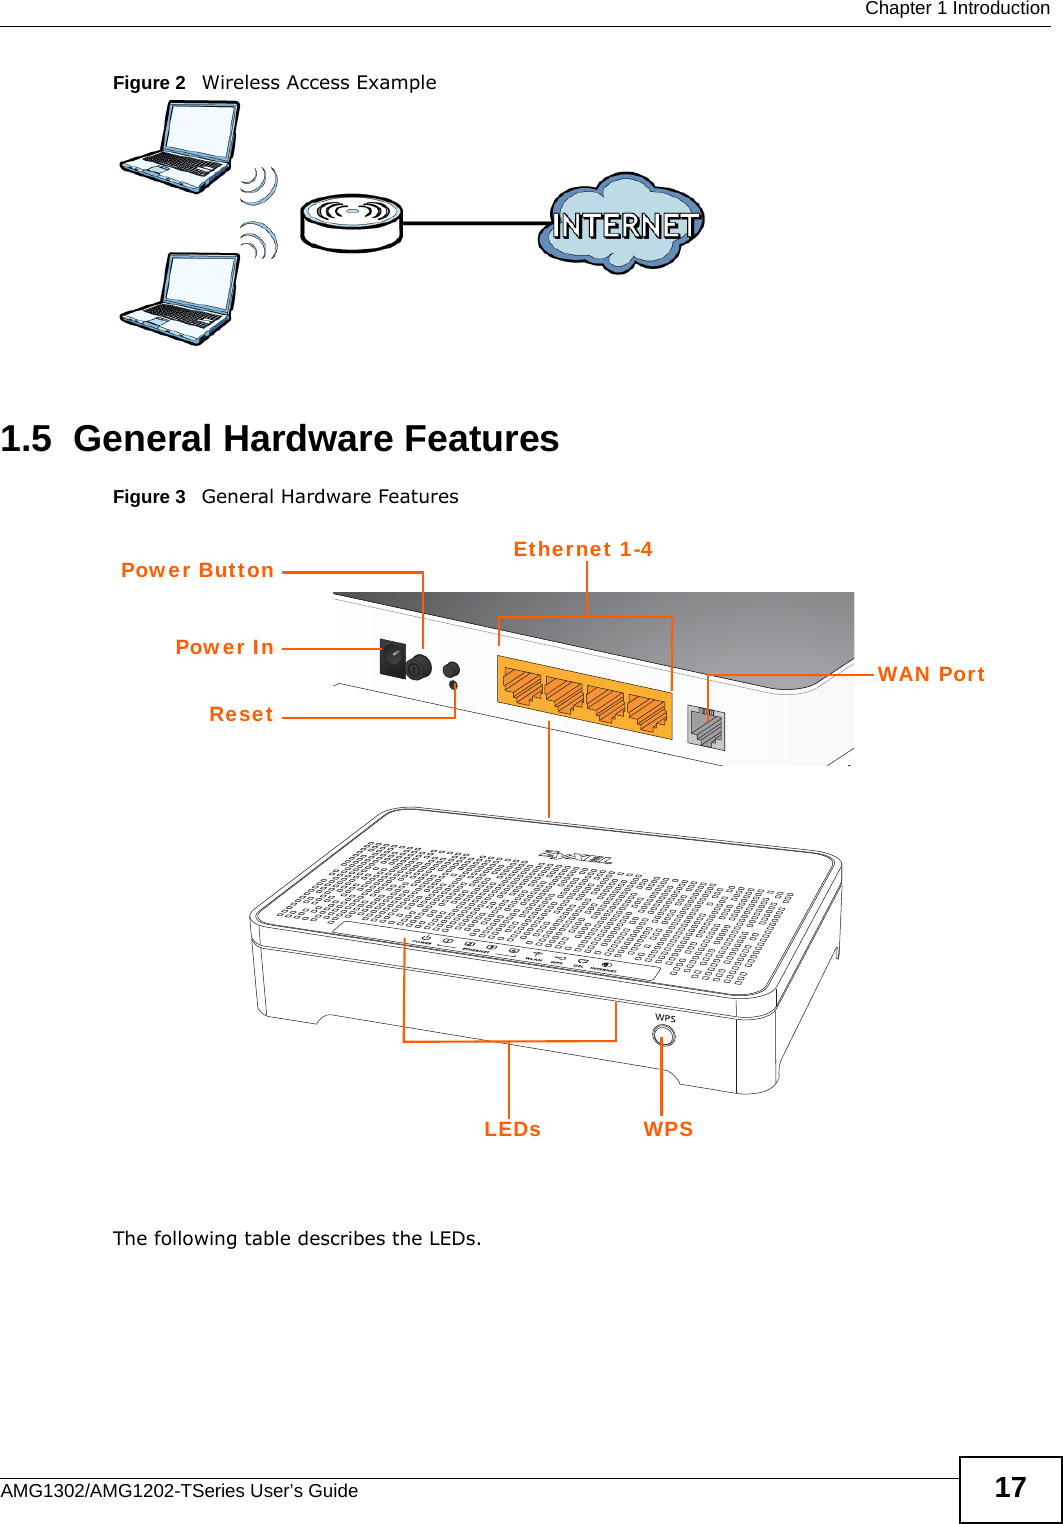  Chapter 1 IntroductionAMG1302/AMG1202-TSeries User’s Guide 17Figure 2   Wireless Access Example1.5  General Hardware FeaturesFigure 3   General Hardware Features The following table describes the LEDs.LEDs WPSPower InPower ButtonResetEthernet 1-4WAN Port